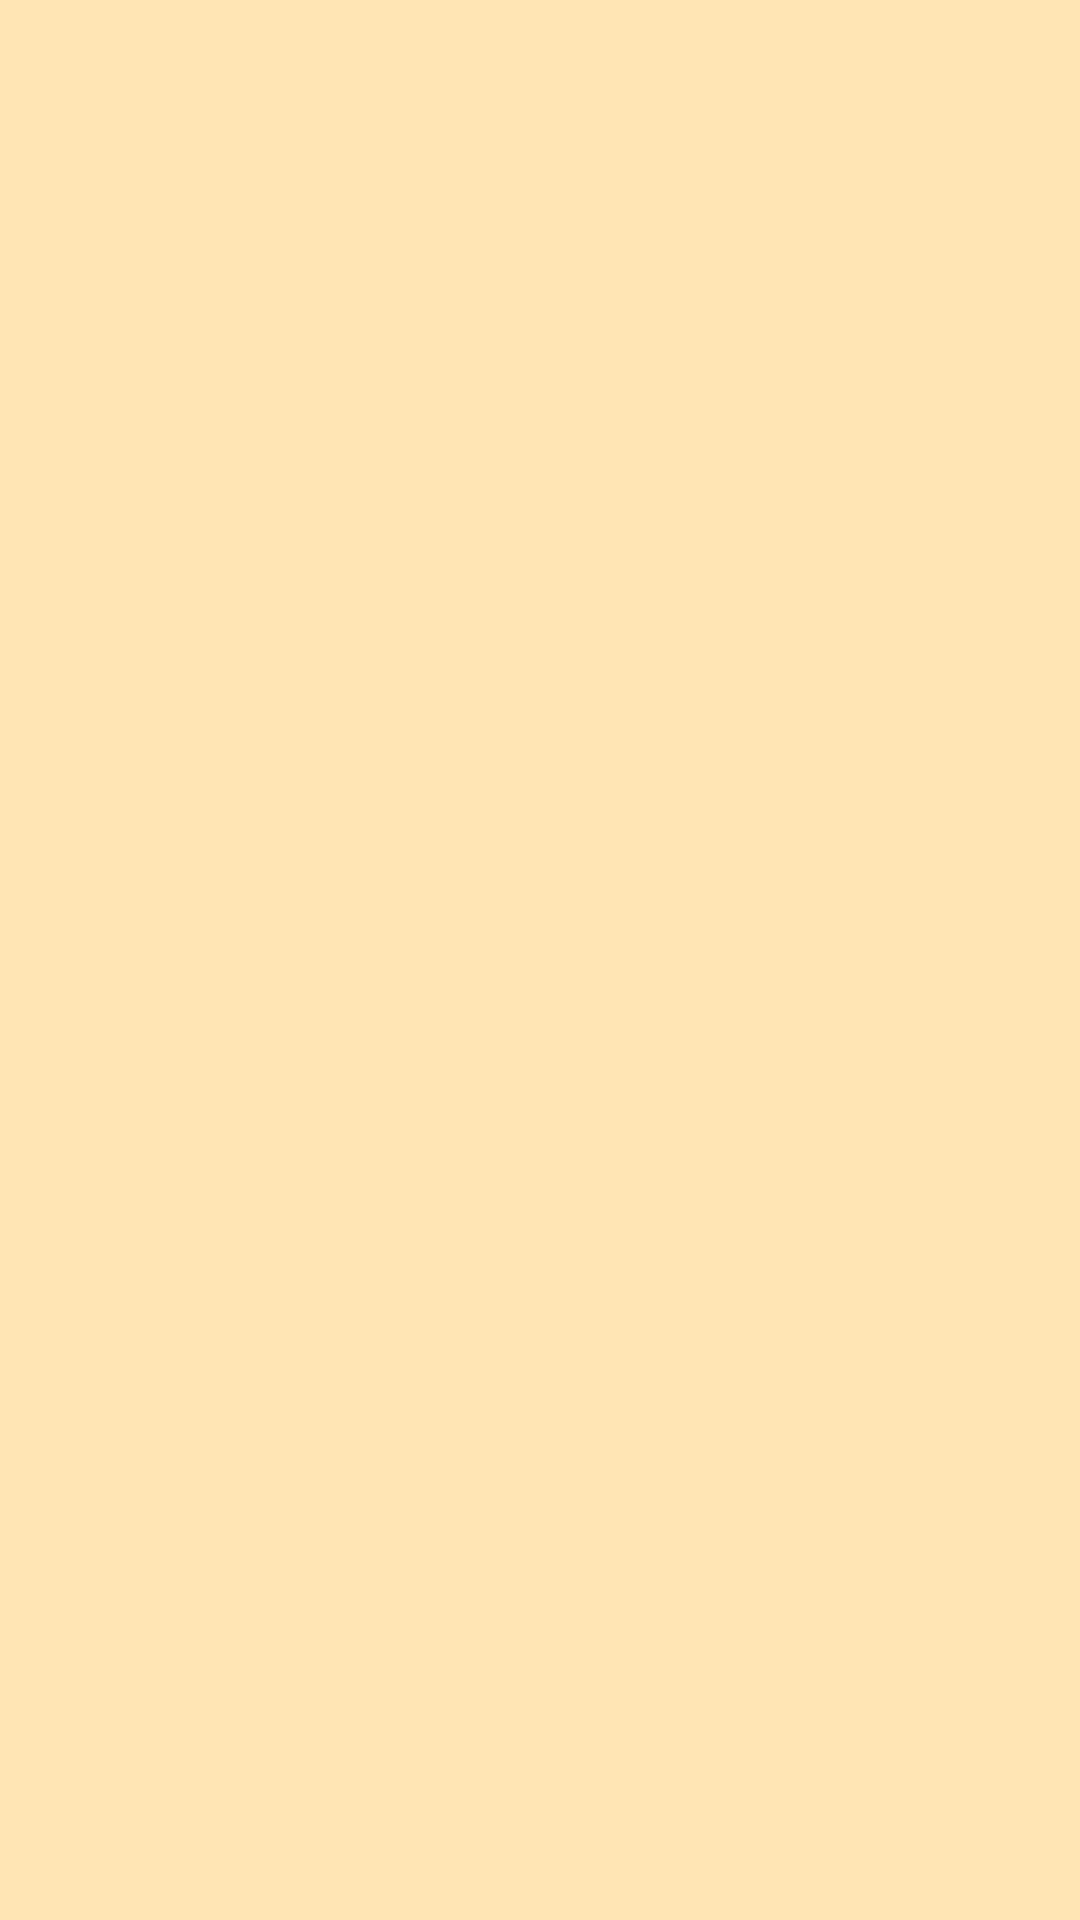 1080x1920 Peach Solid Color Background